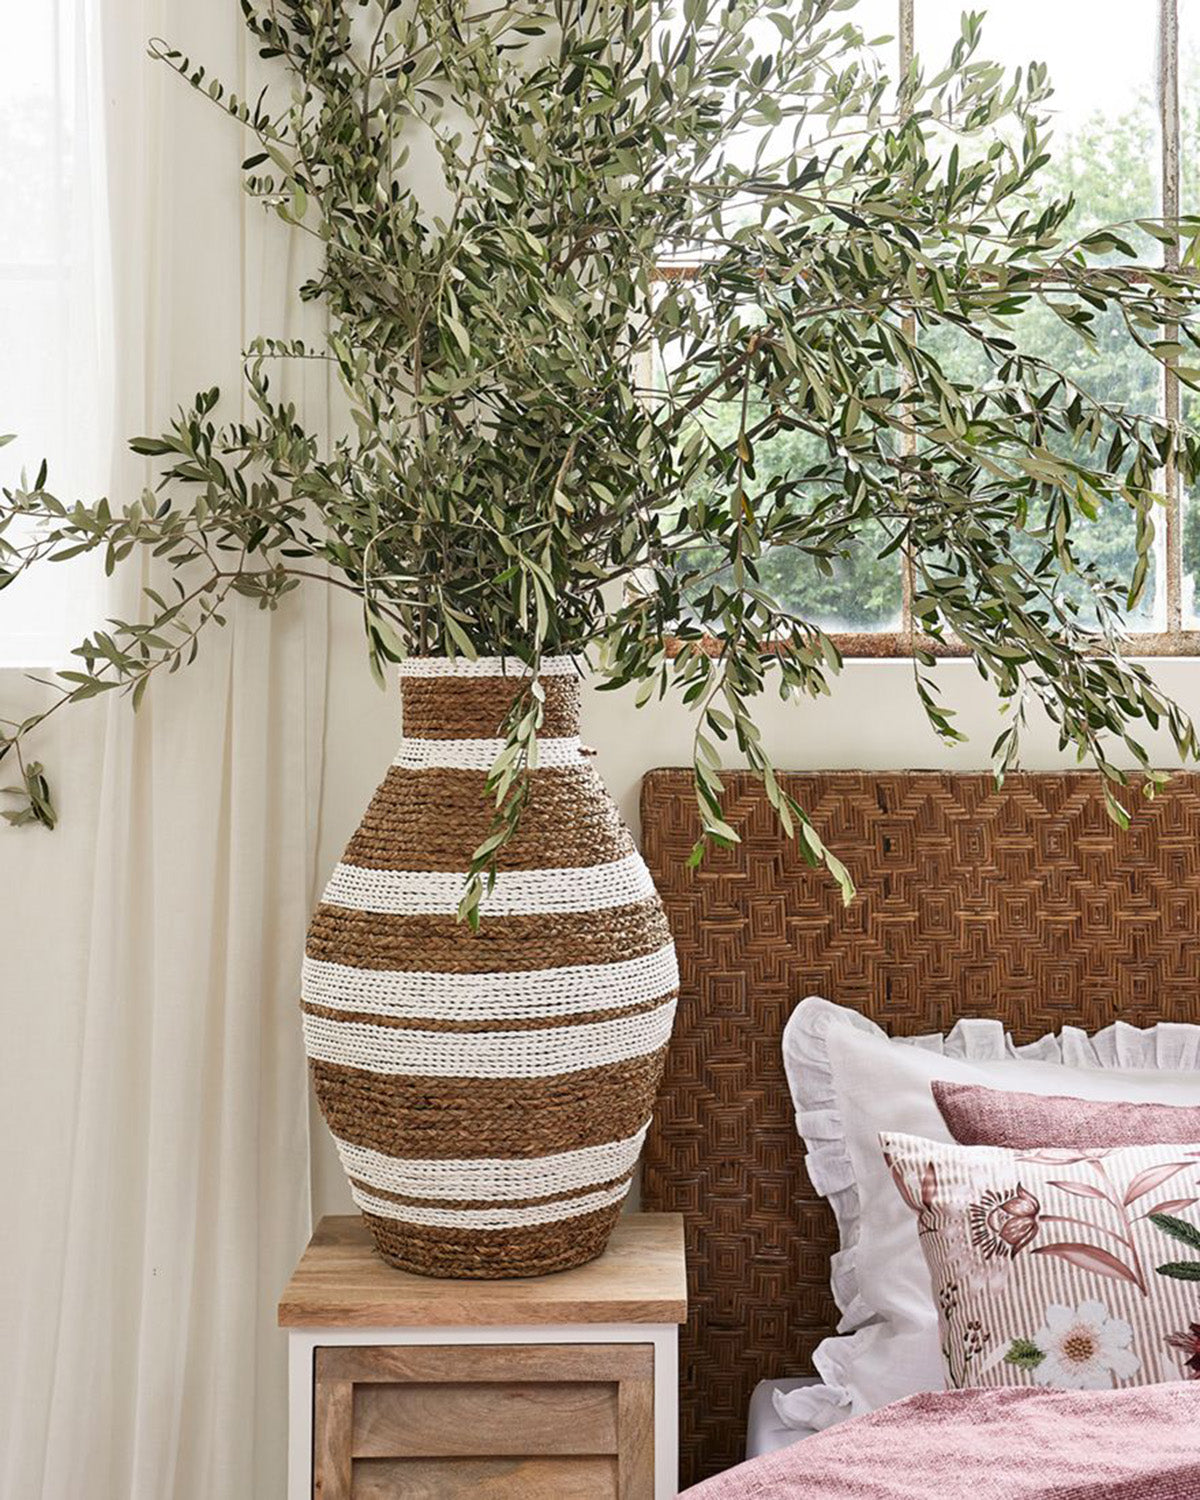 VASE made of raffia hand-woven, partially painted white, decorated wit green plants by Riviera Maison